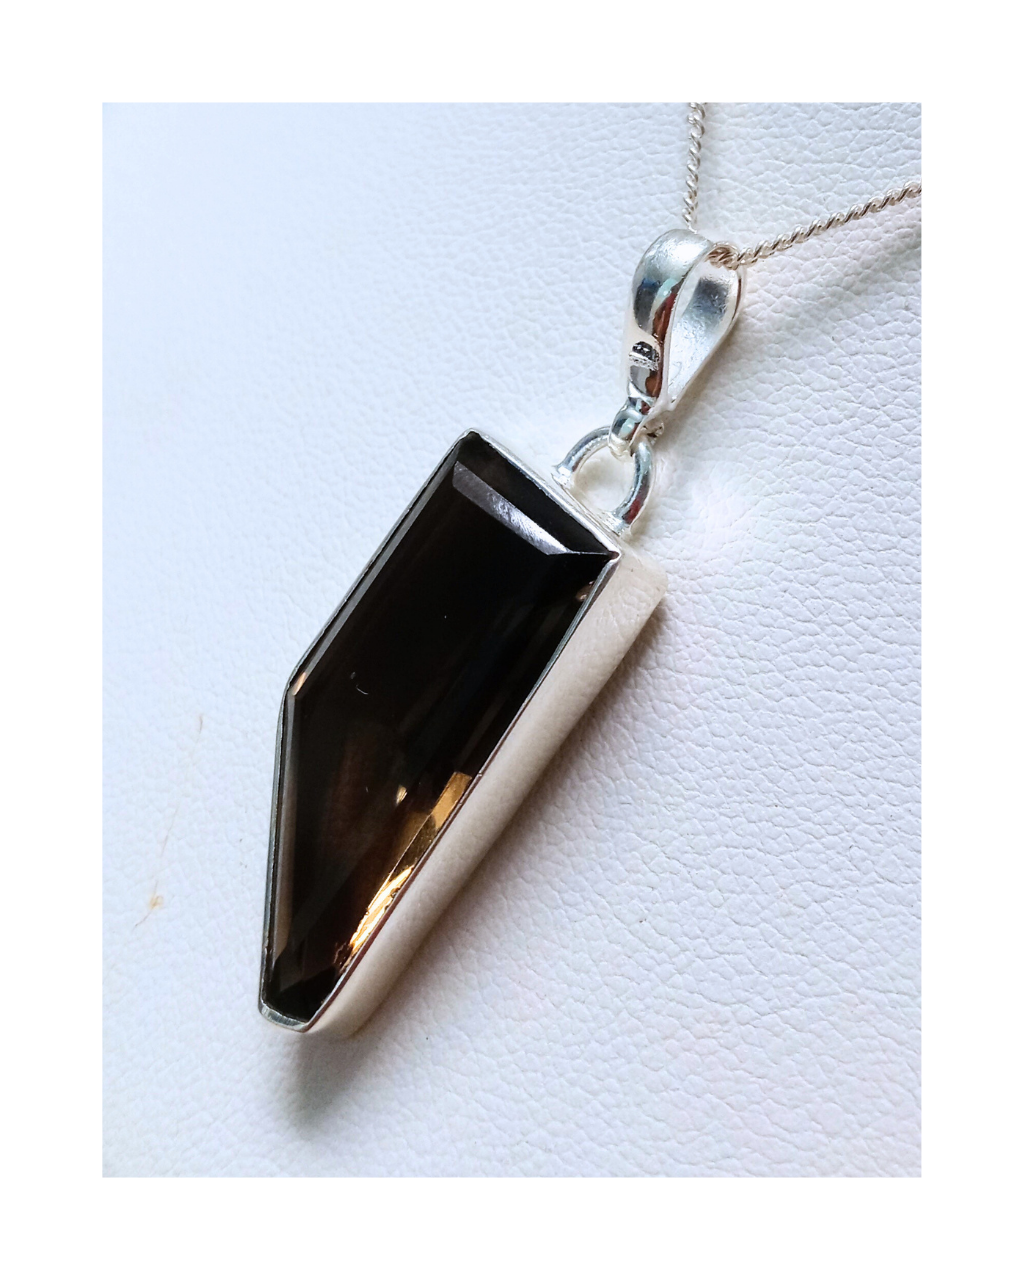 Sterling Uniquely-shaped Faceted Smoky Quartz Removable Pendant 1 3/4"H X 9/16"W and 16" Curb Chain. ONE ONLY